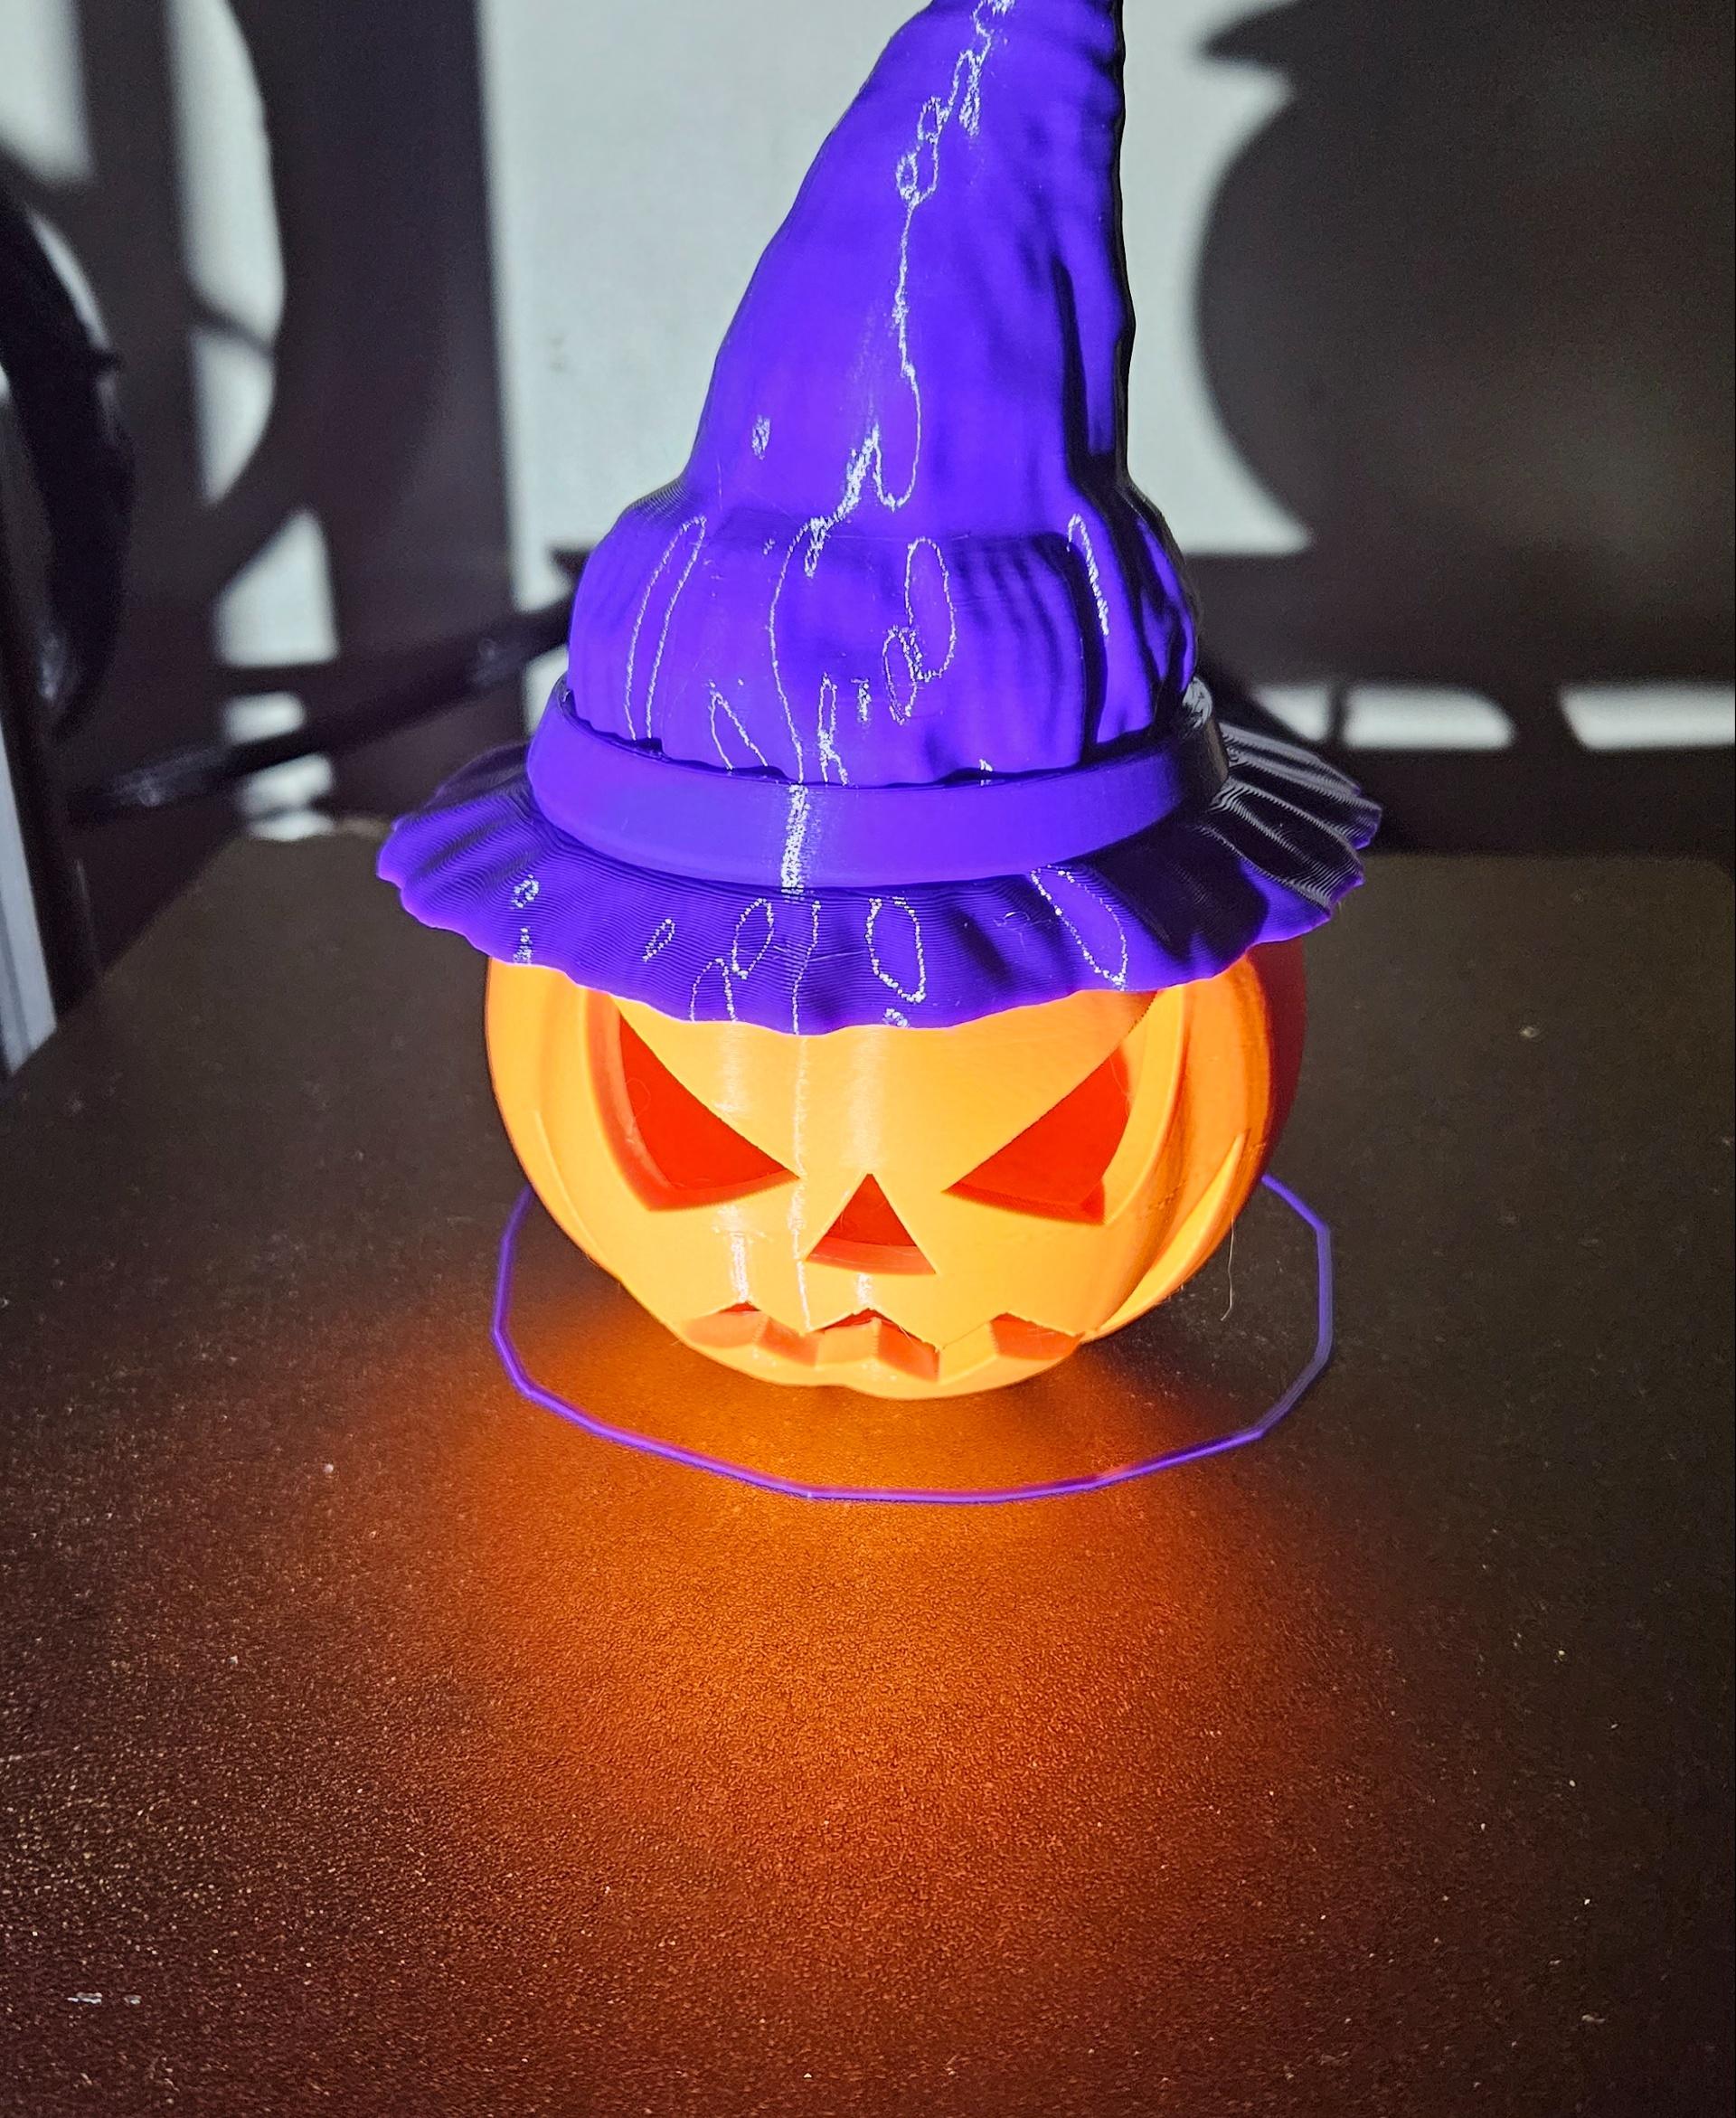 Witch Hat + Pumpkin 🎃 🎃 👻 (multicolor multipart 3mf) - Printed using CR10 designed by Mel's 3D - 3d model